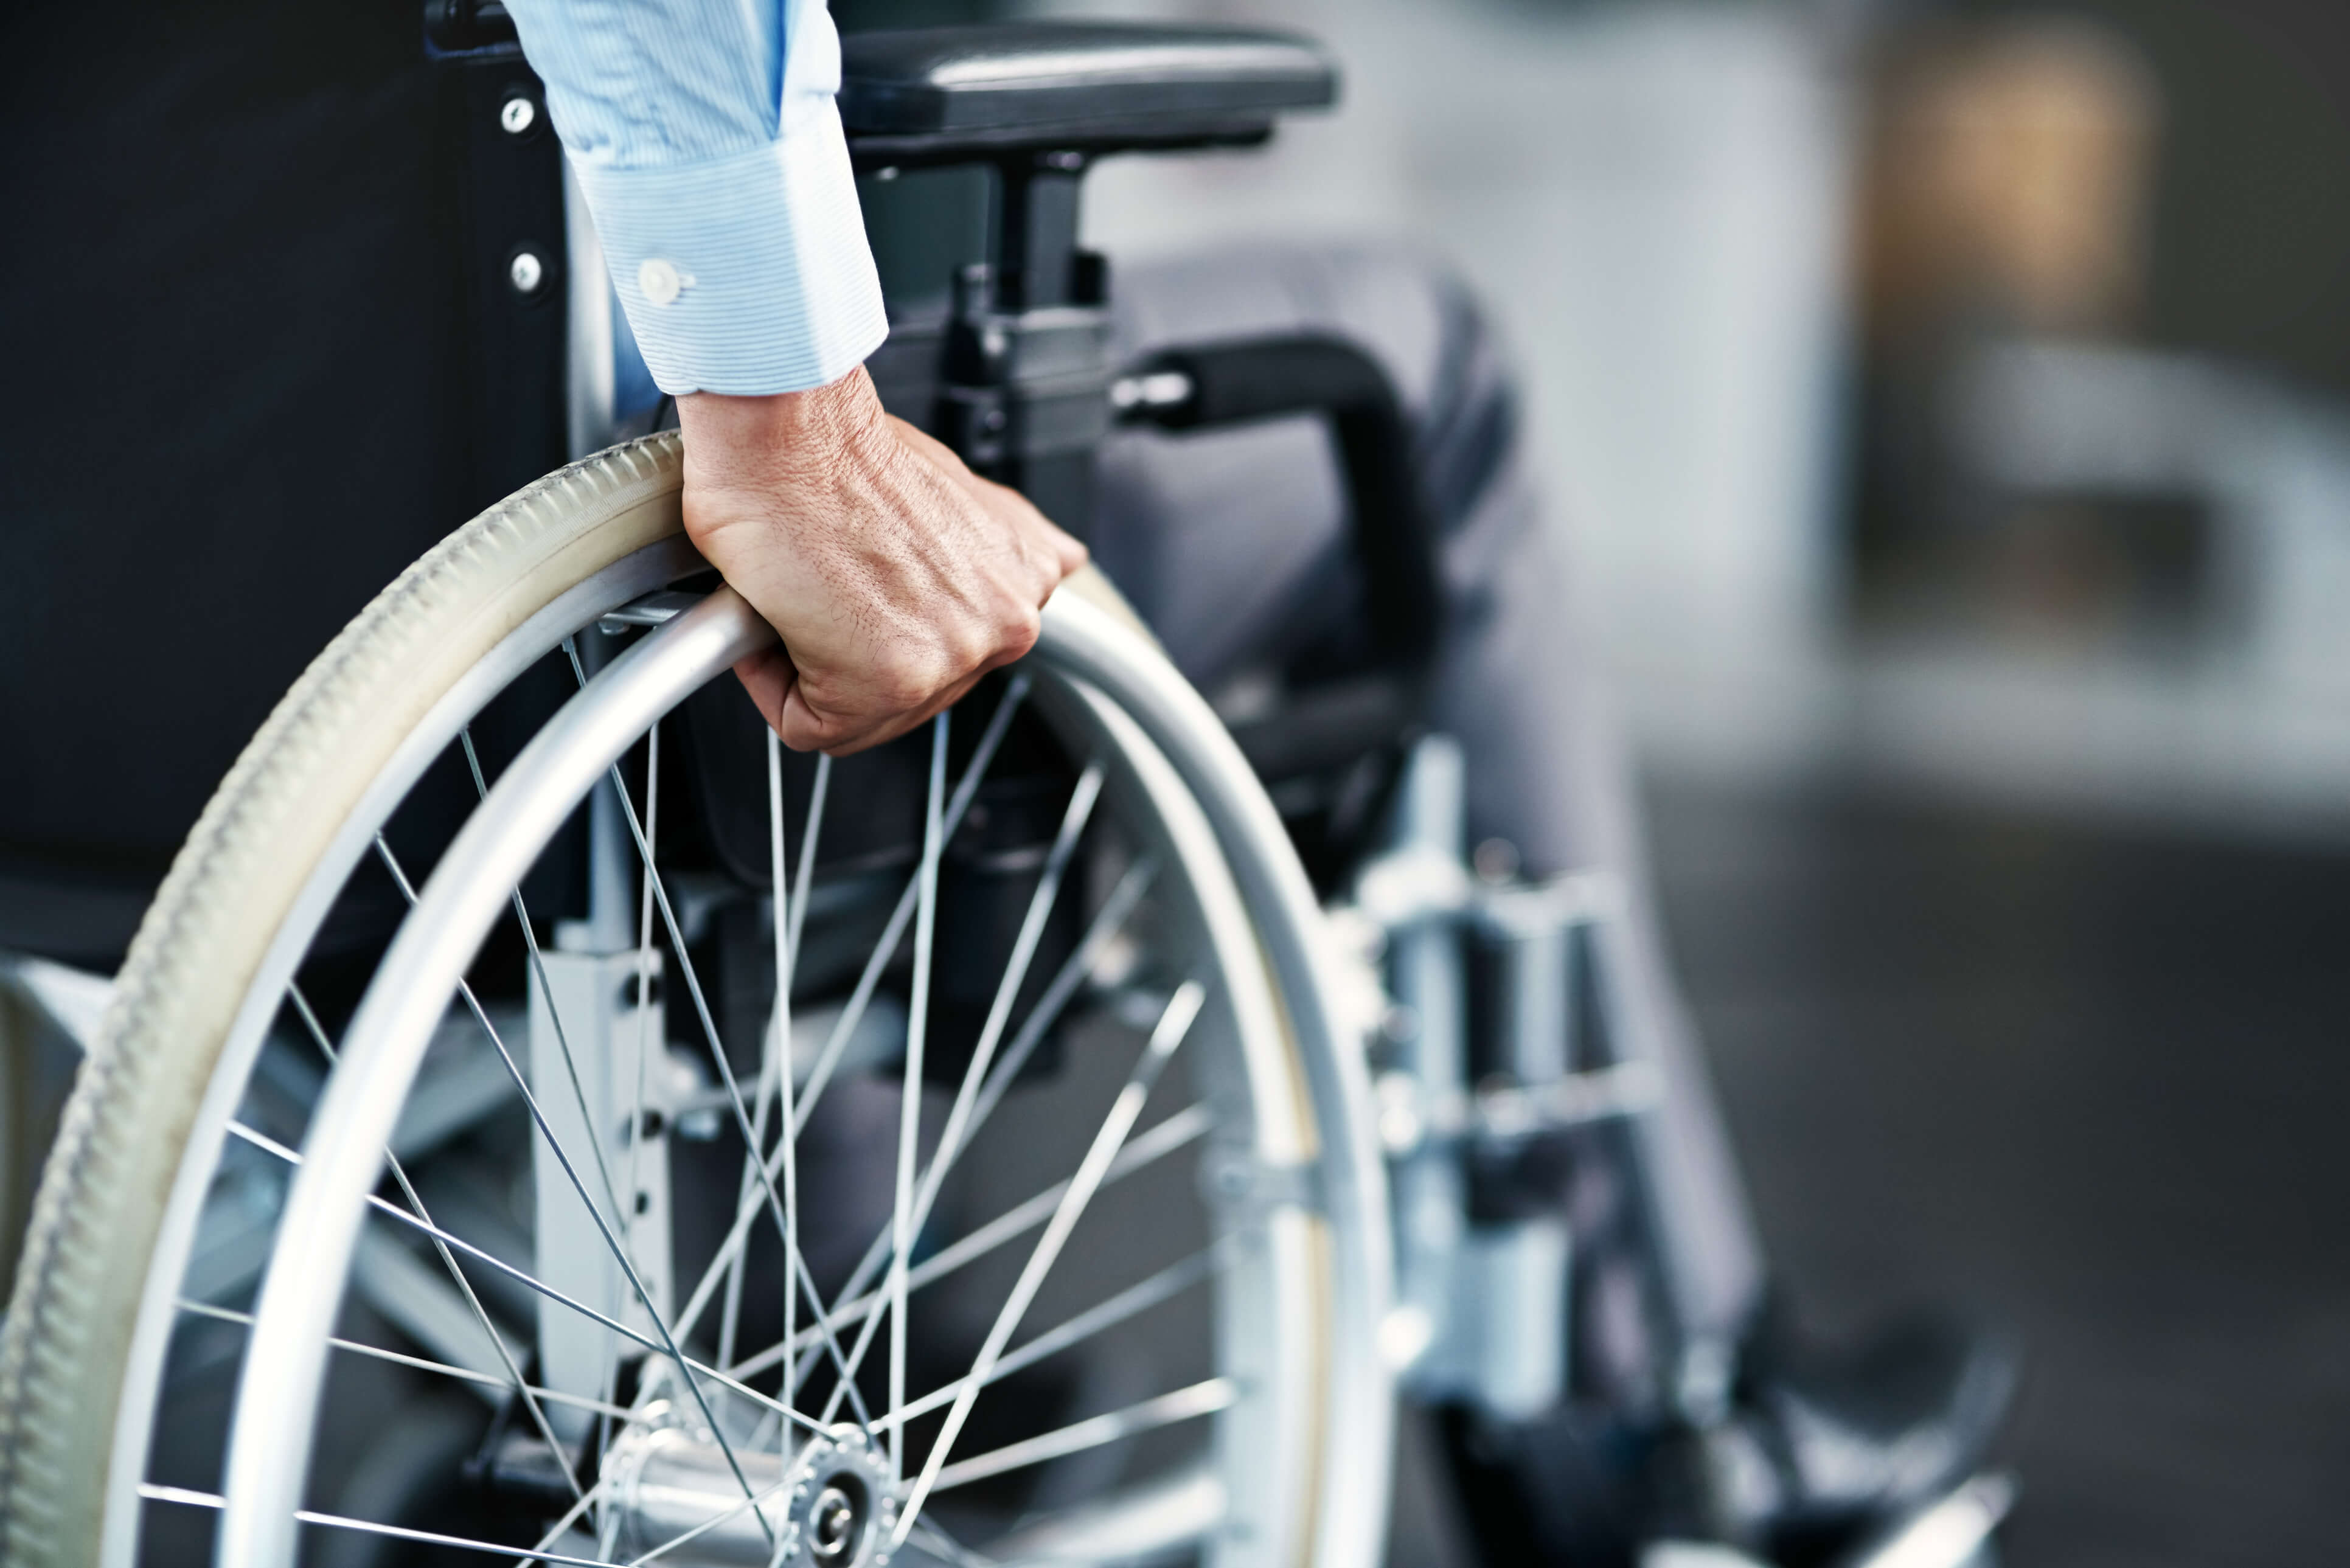 Roeschke Law discusses the impact of legally-assisted suicide on the disabled.